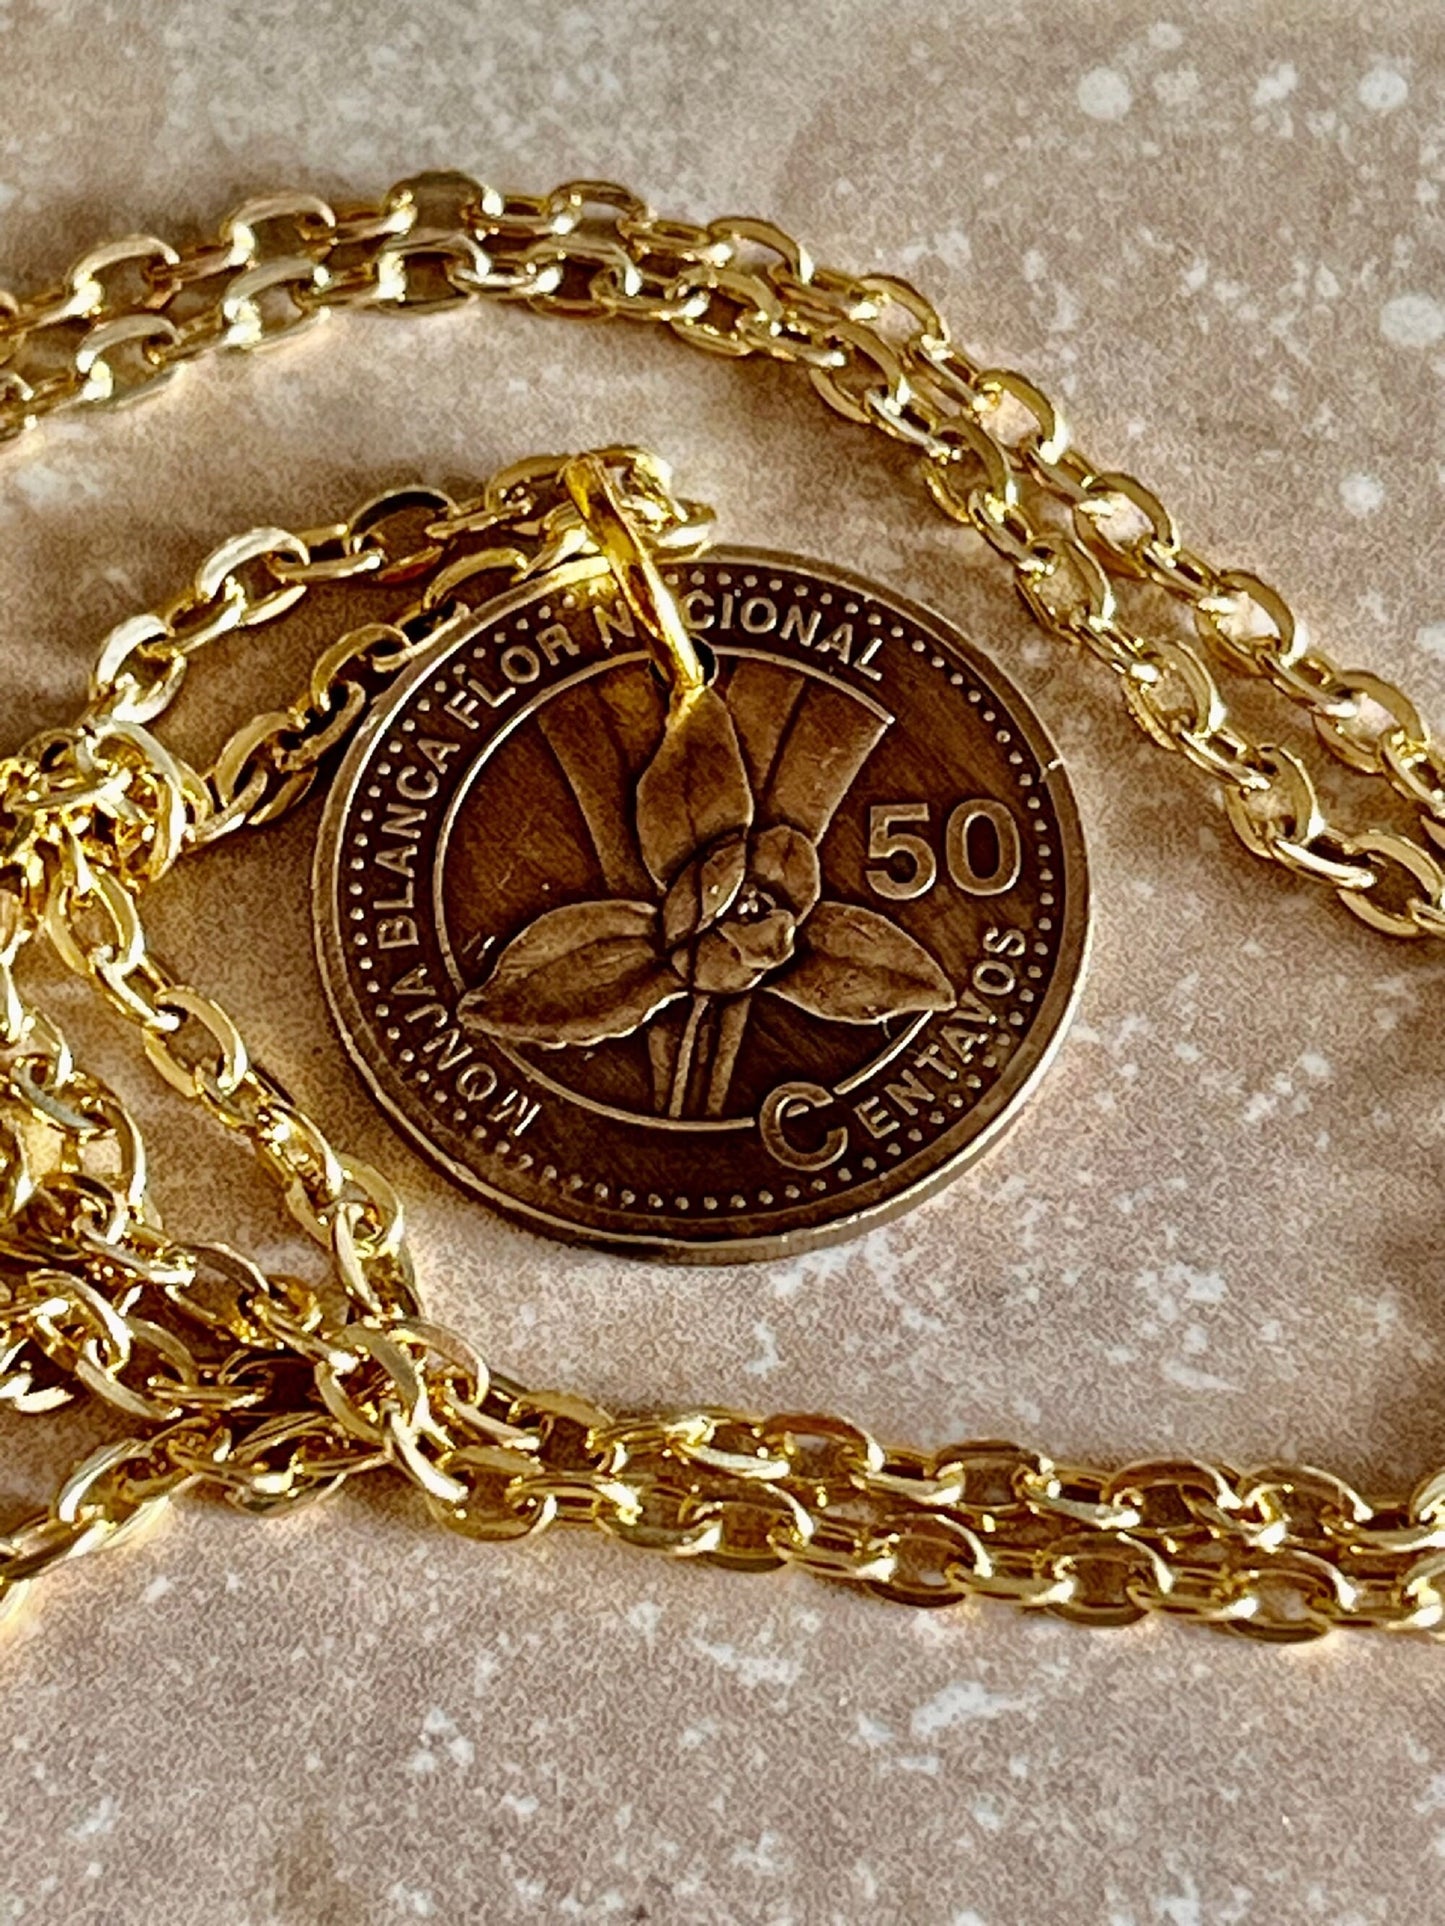 Guatemala Coin Necklace 50 Centavos Coin Pendant Personal Old Vintage Handmade Jewelry Gift Friend Charm For Him Her World Coin Collector